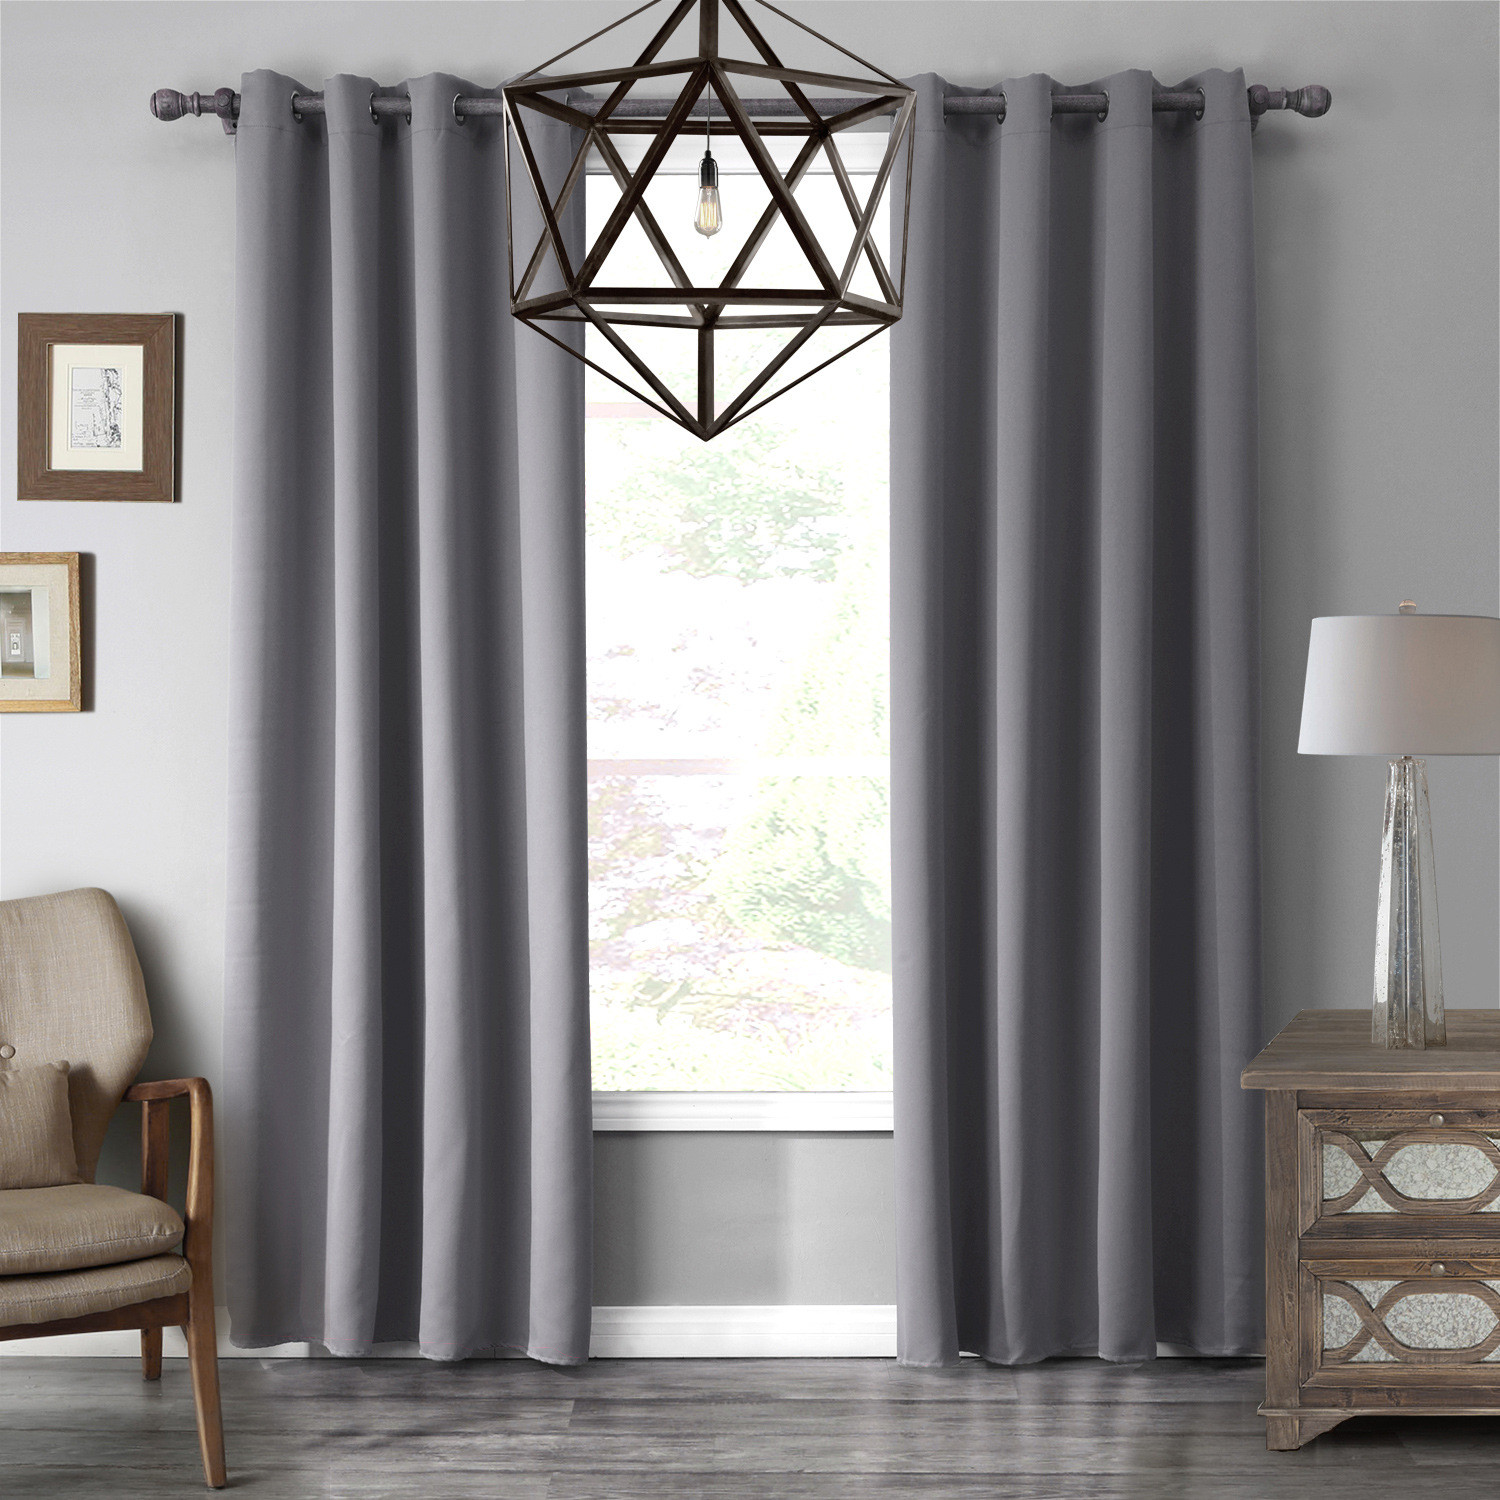 Living Room Blackout Curtains
 Gray Blackout Thermal Simple Bedroom Living Room Curtains